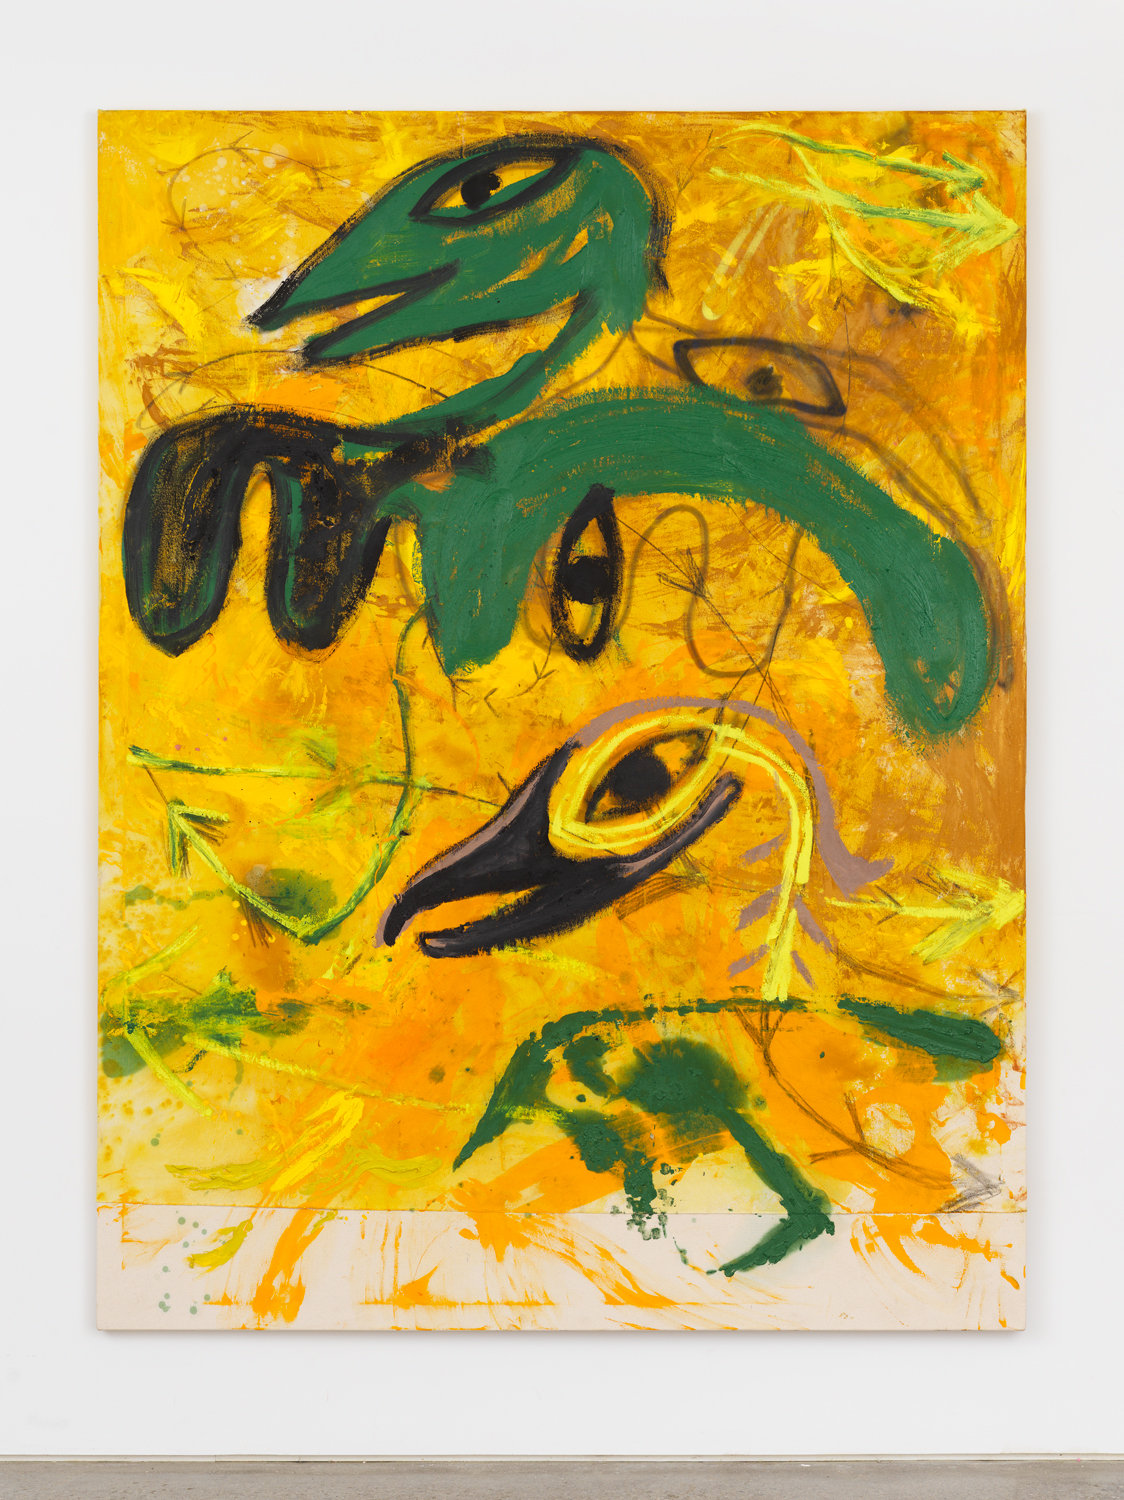 Bill Saylor, Breakers Gold, 2019, Oil, spray paint, graphite, and Flashe on canvas, 84h x 64w in.